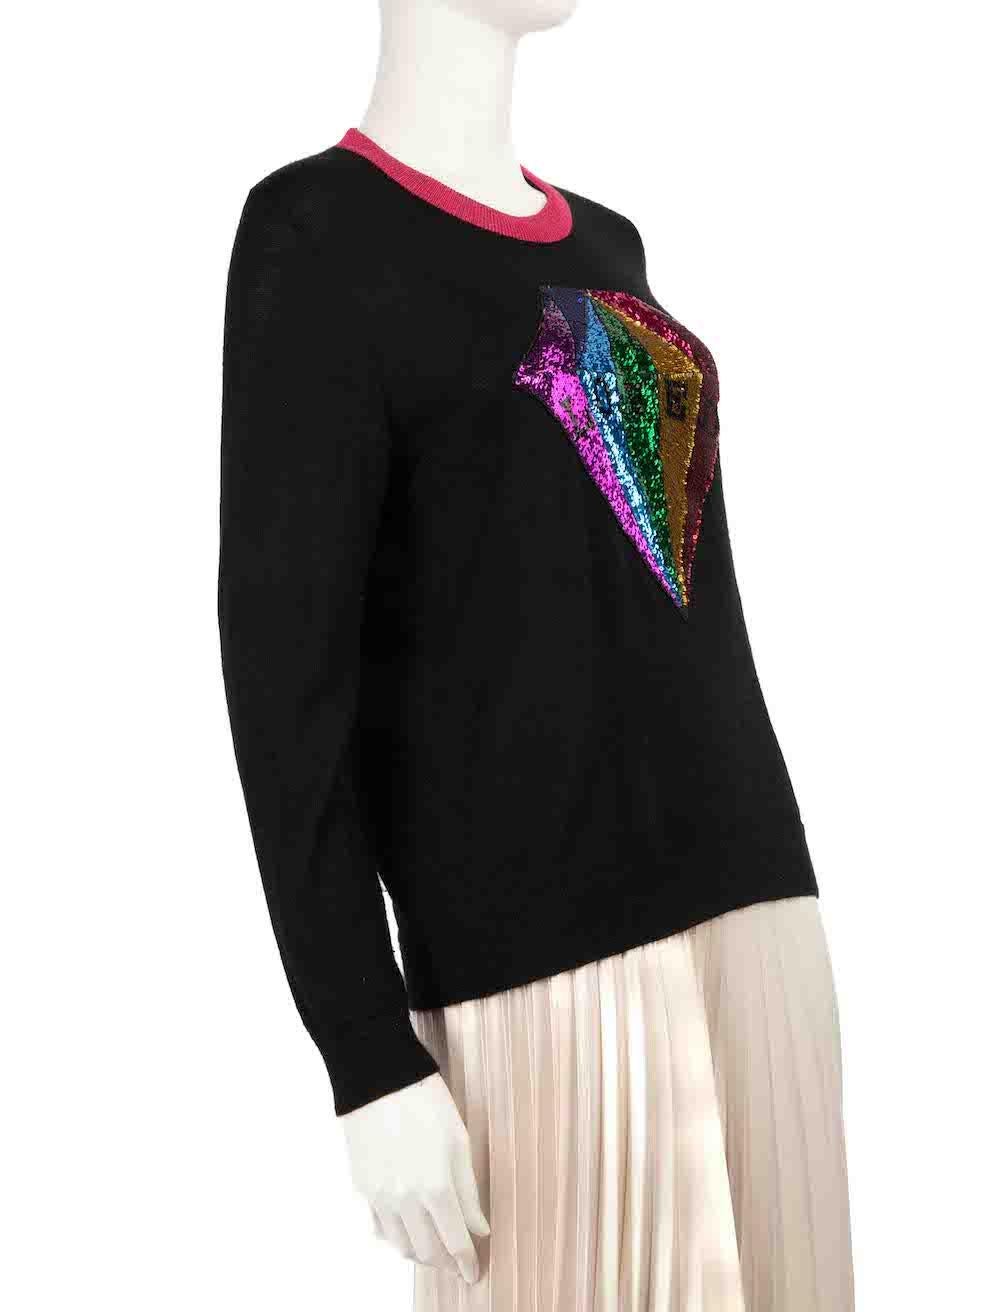 CONDITION is Good. Minor wear to jumper is evident. Light wear to the knit composition with mild pilling seen throughout as well as a couple of very small plucks to the yarn on this used Gucci designer resale item.
 
 
 
 Details
 
 
 Black
 
